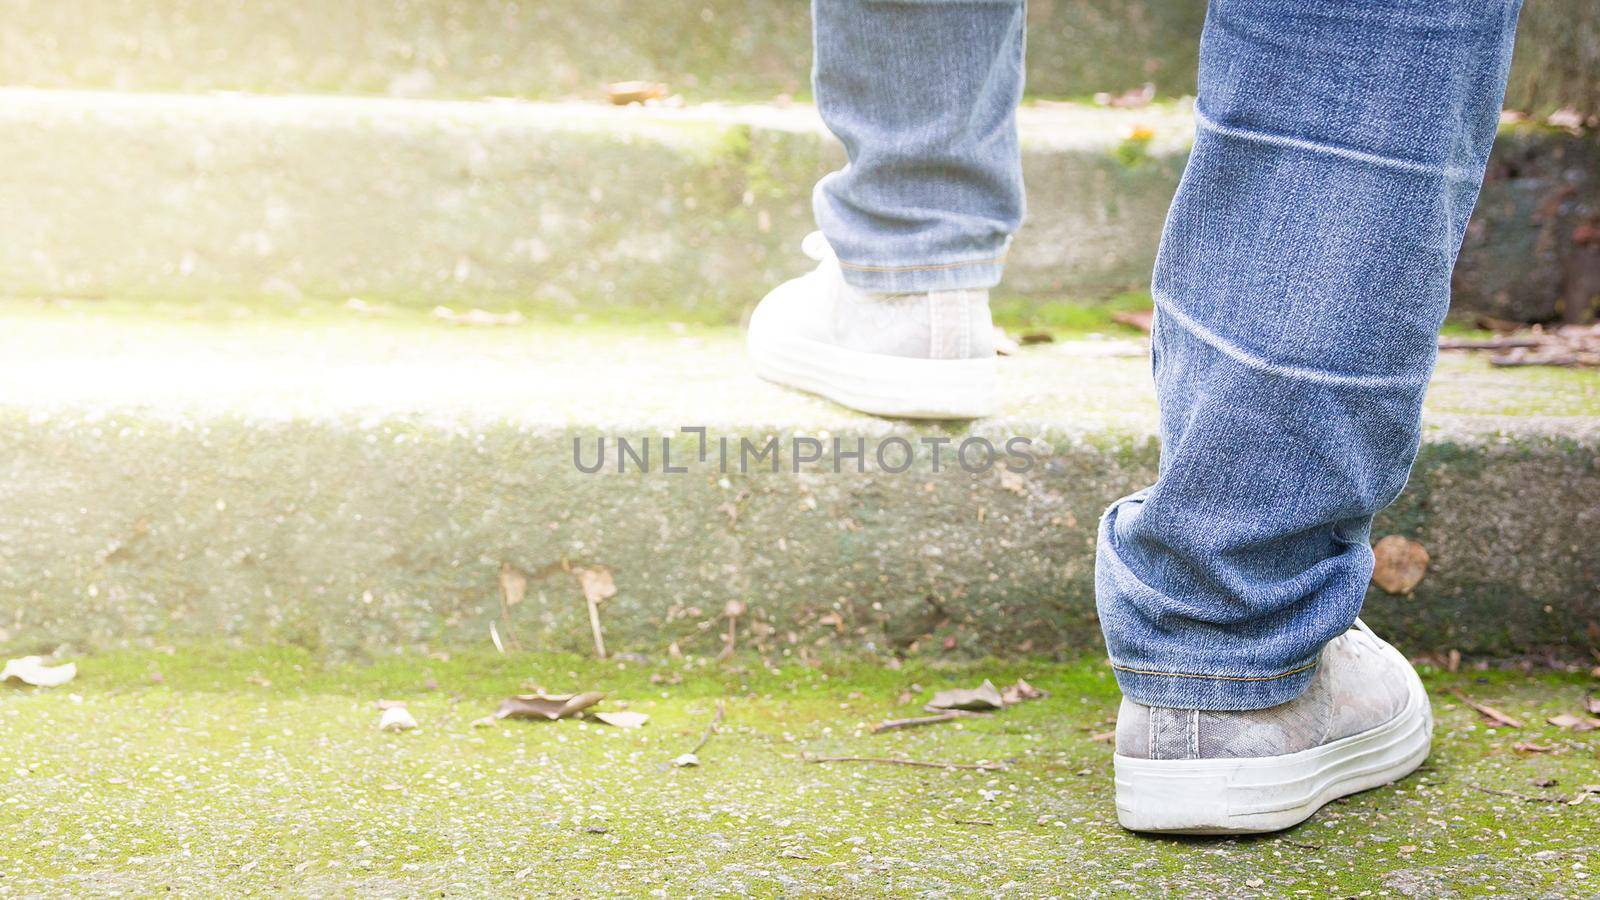 Feet Sneakers And Jeans Walking On Staircase Outdoor With Autumn Season by rakoptonLPN